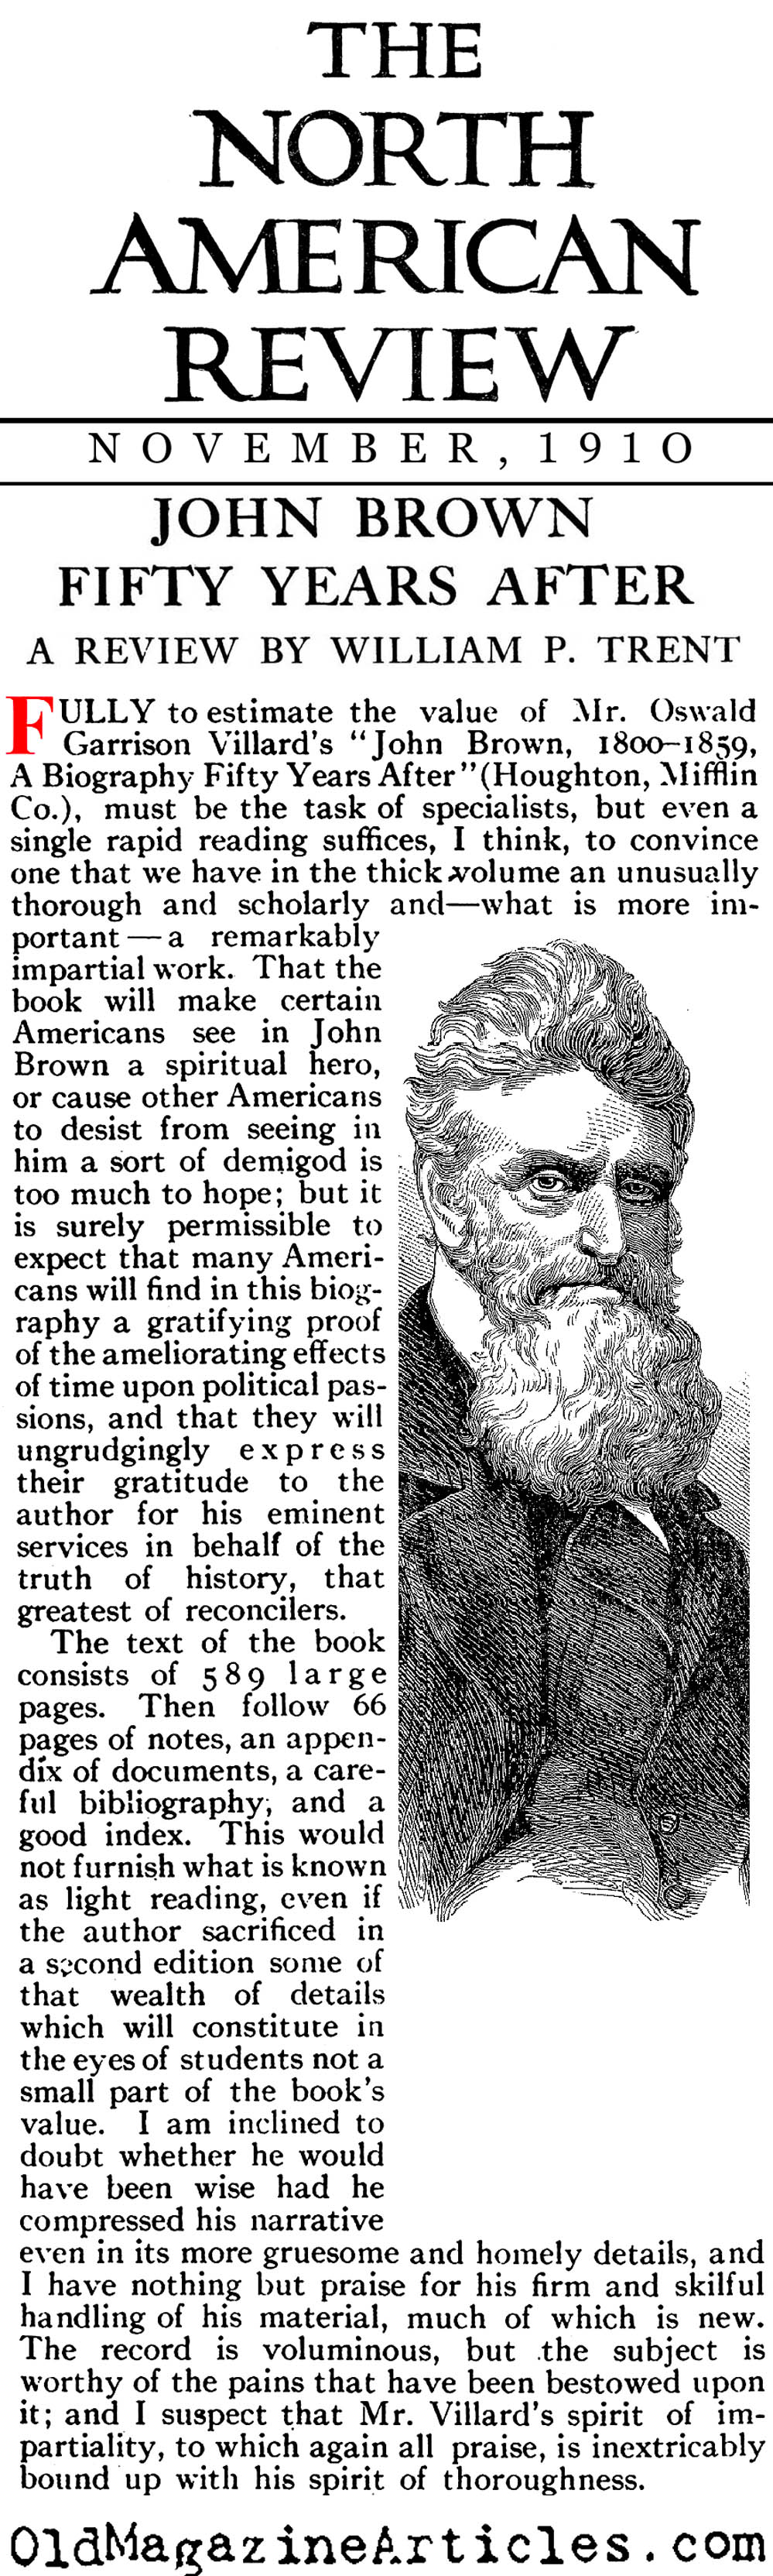 John Brown Examined (The North American Review, 1910)